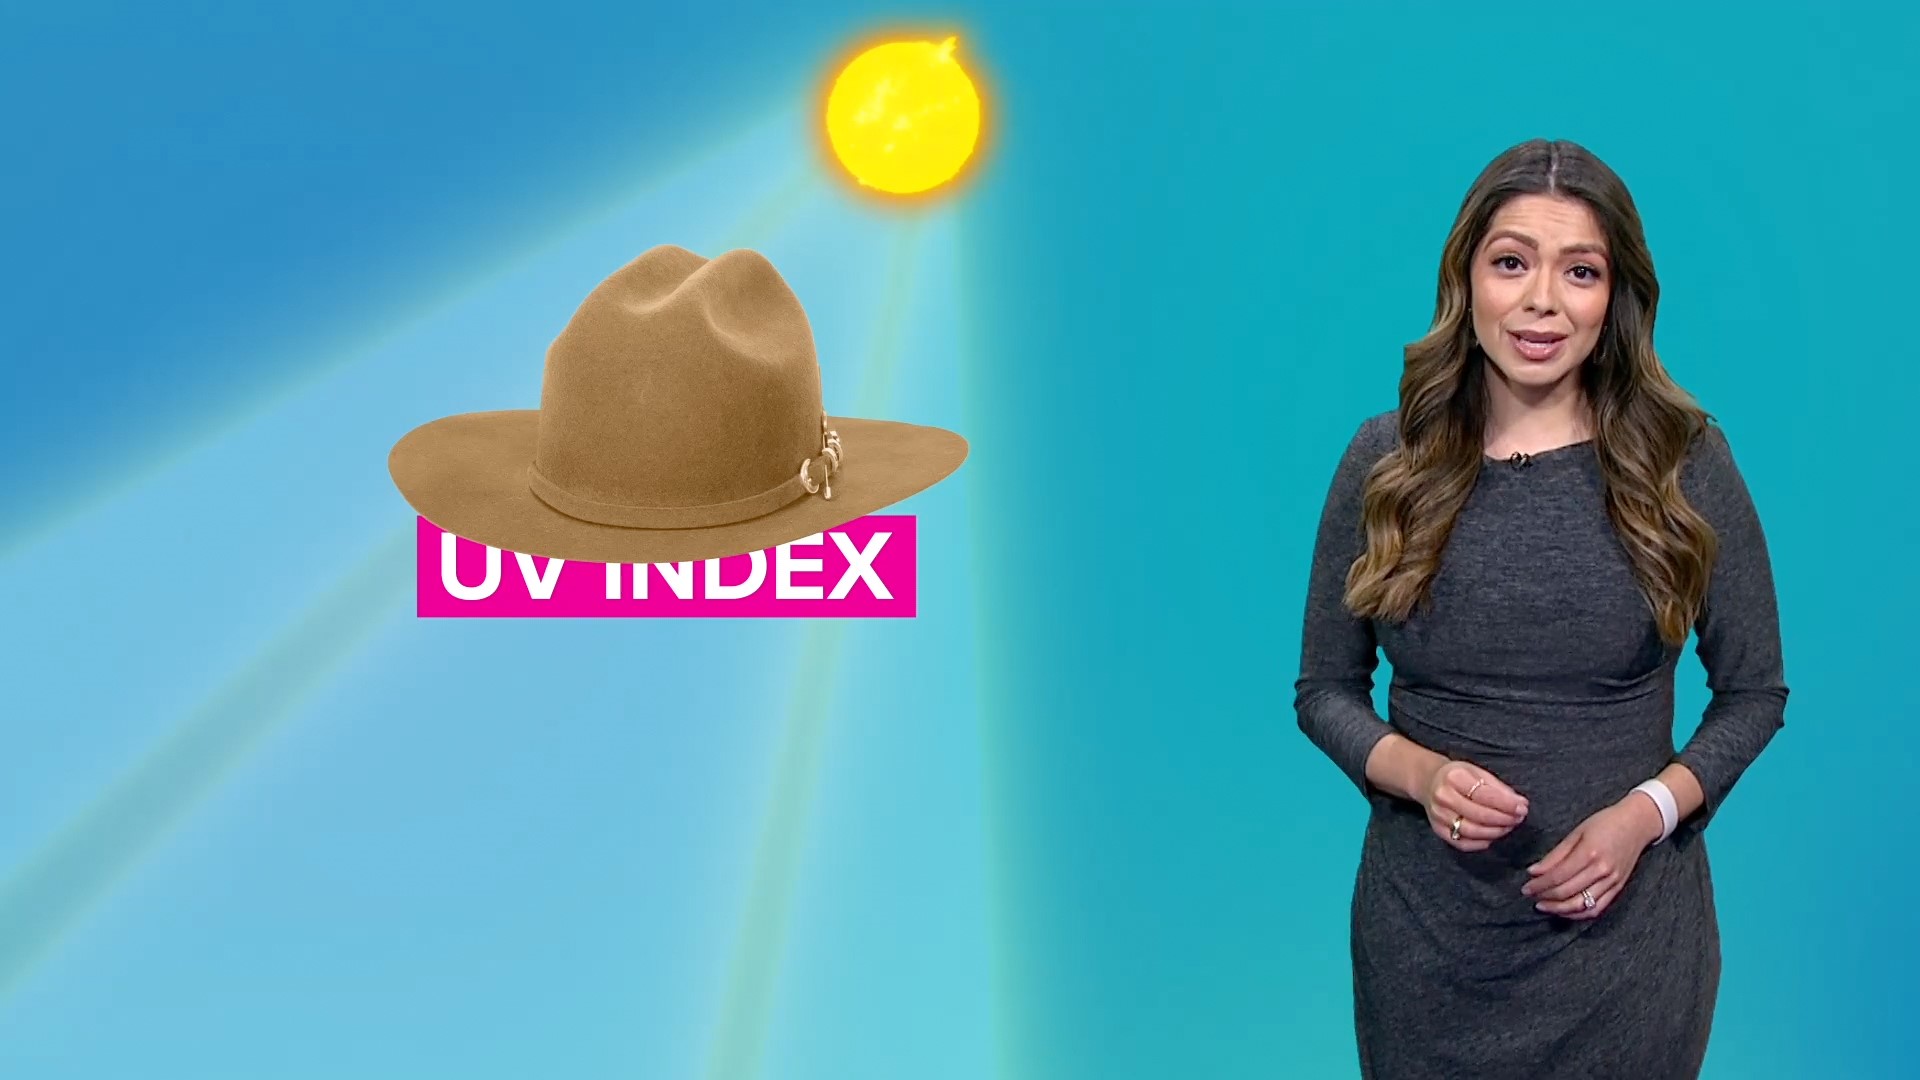 WFAA's Mariel Ruiz explains why the North Texas UV Index is so important.